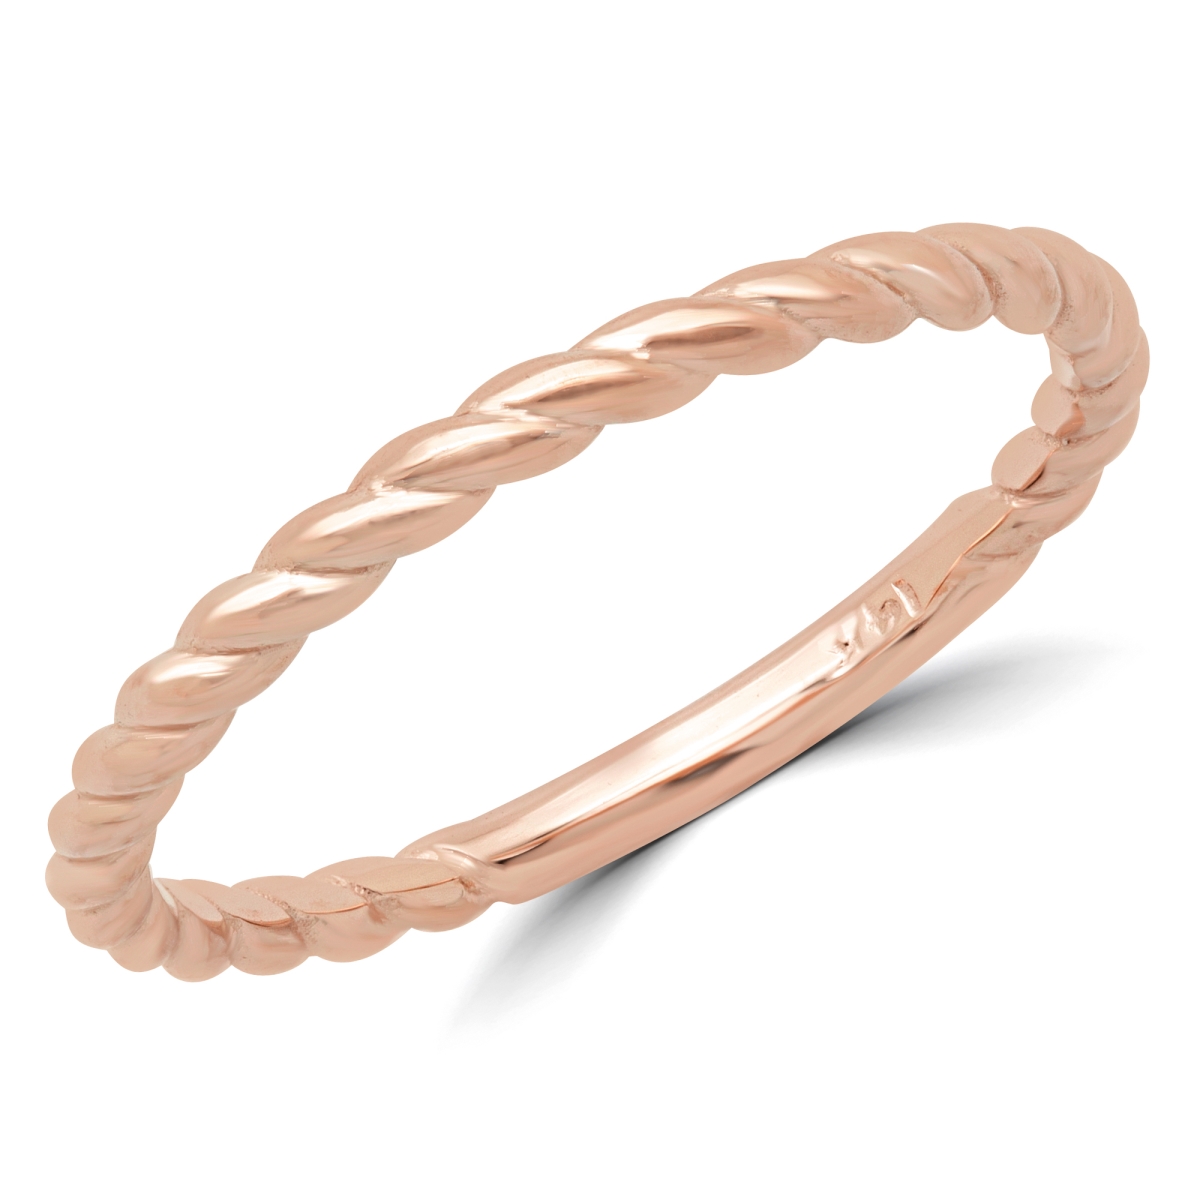 Picture of Majesty Diamonds MD180603-6.5 Braided Rope Classic Wedding Band Ring in 14K Rose Gold - Size 6.5